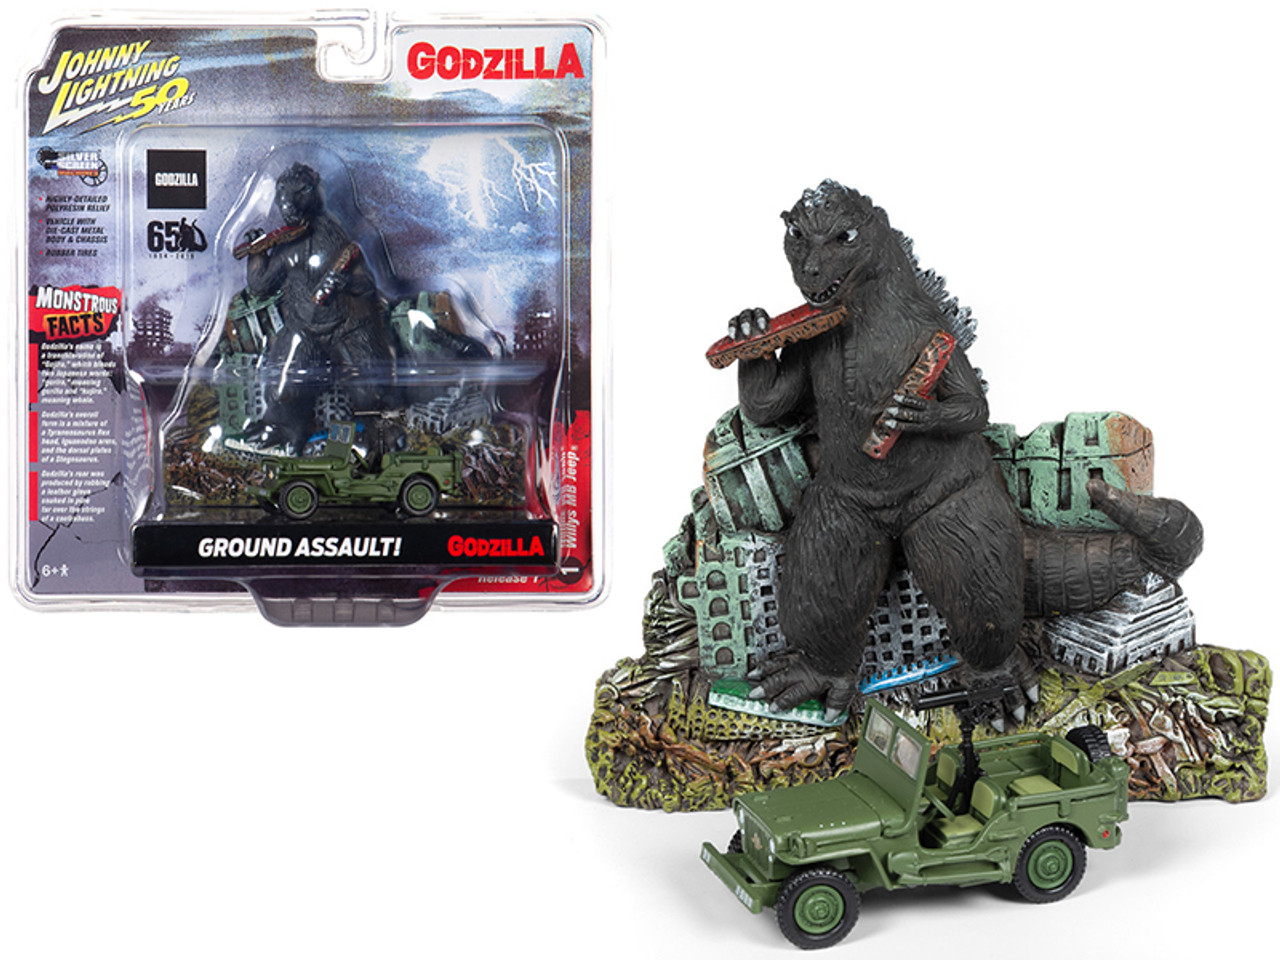 Willys MB Jeep "Japan Police Reserve Corps" with "Godzilla" Facade Diorama "Godzilla 65th Anniversary" (1954-2019) "Johnny Lightning 50th Anniversary" 1/64 Diecast Model Car by Johnny Lightning